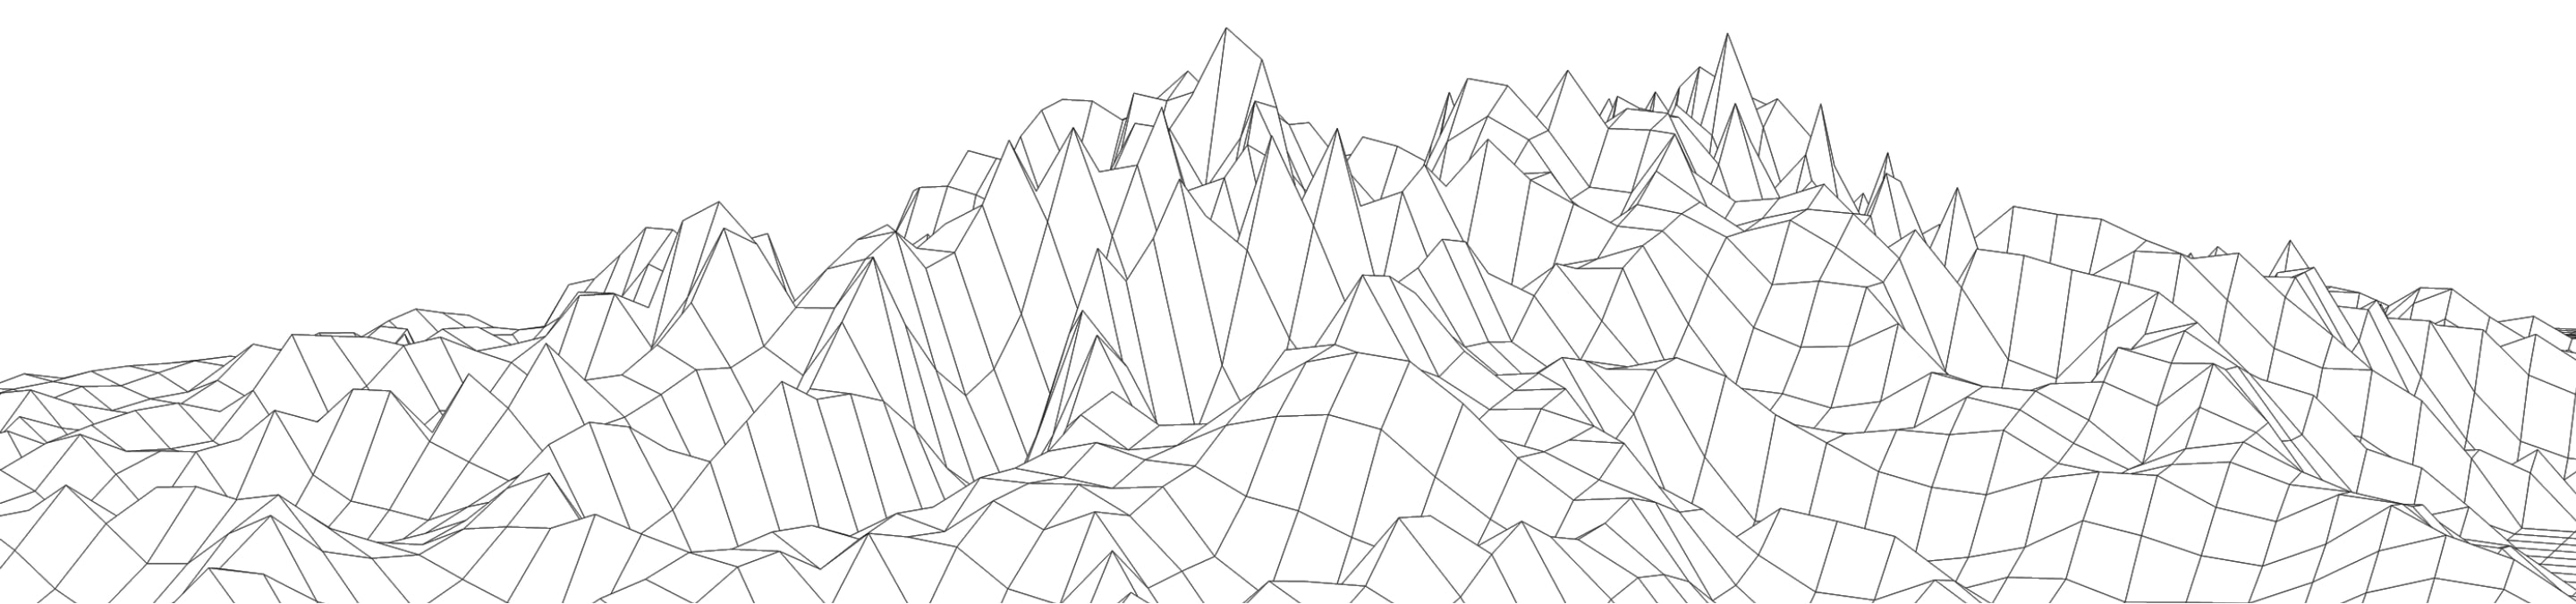 graphic mountains